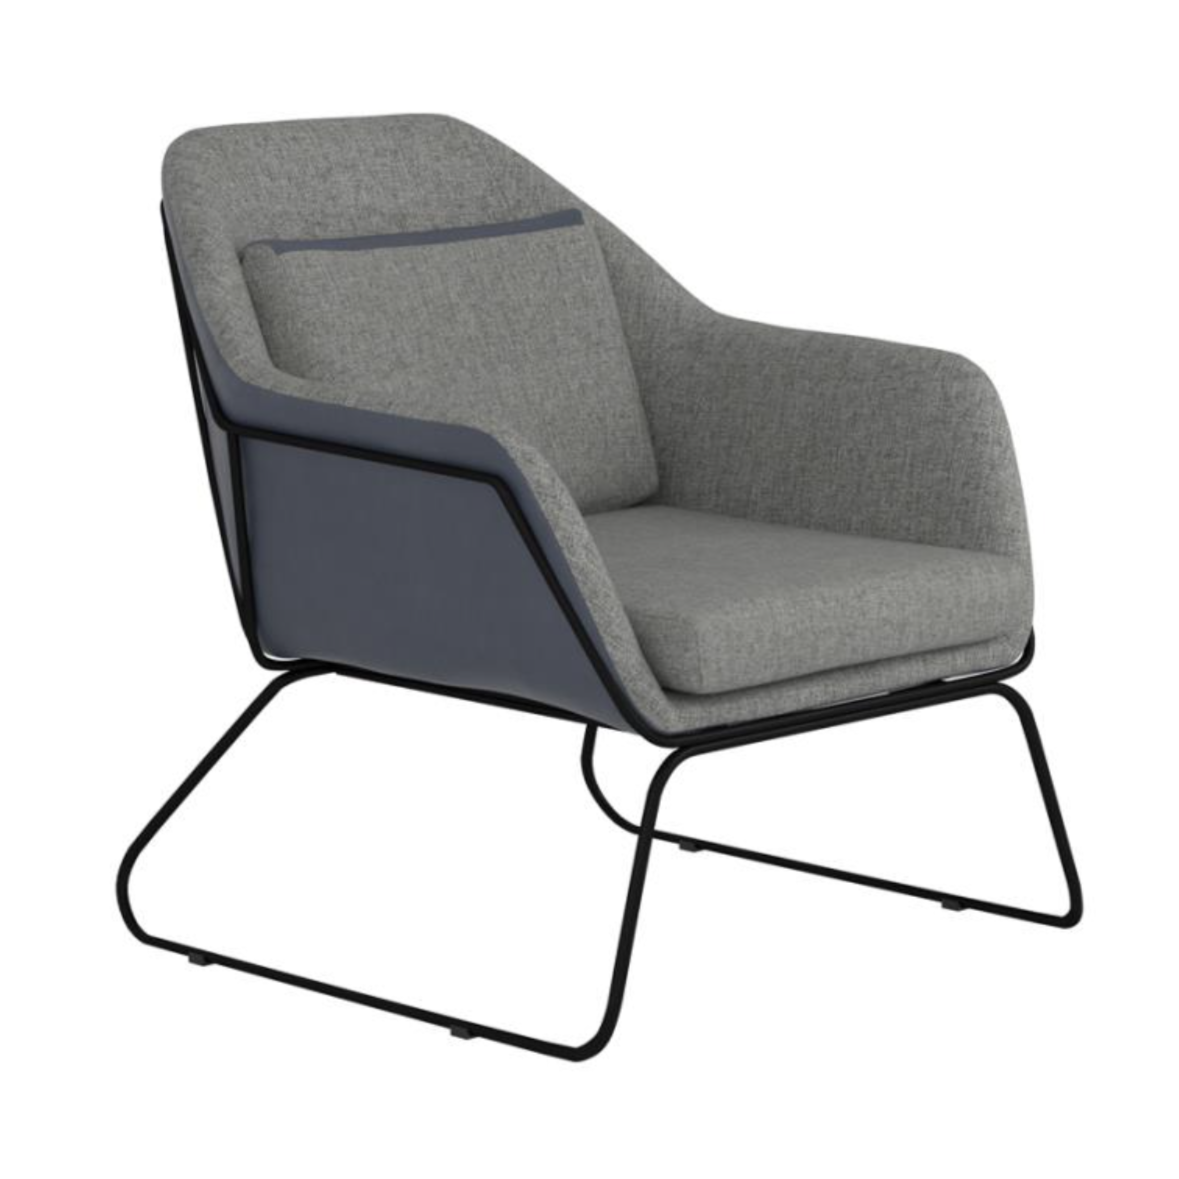 Two Toned Accent Chair - Grey and Navy